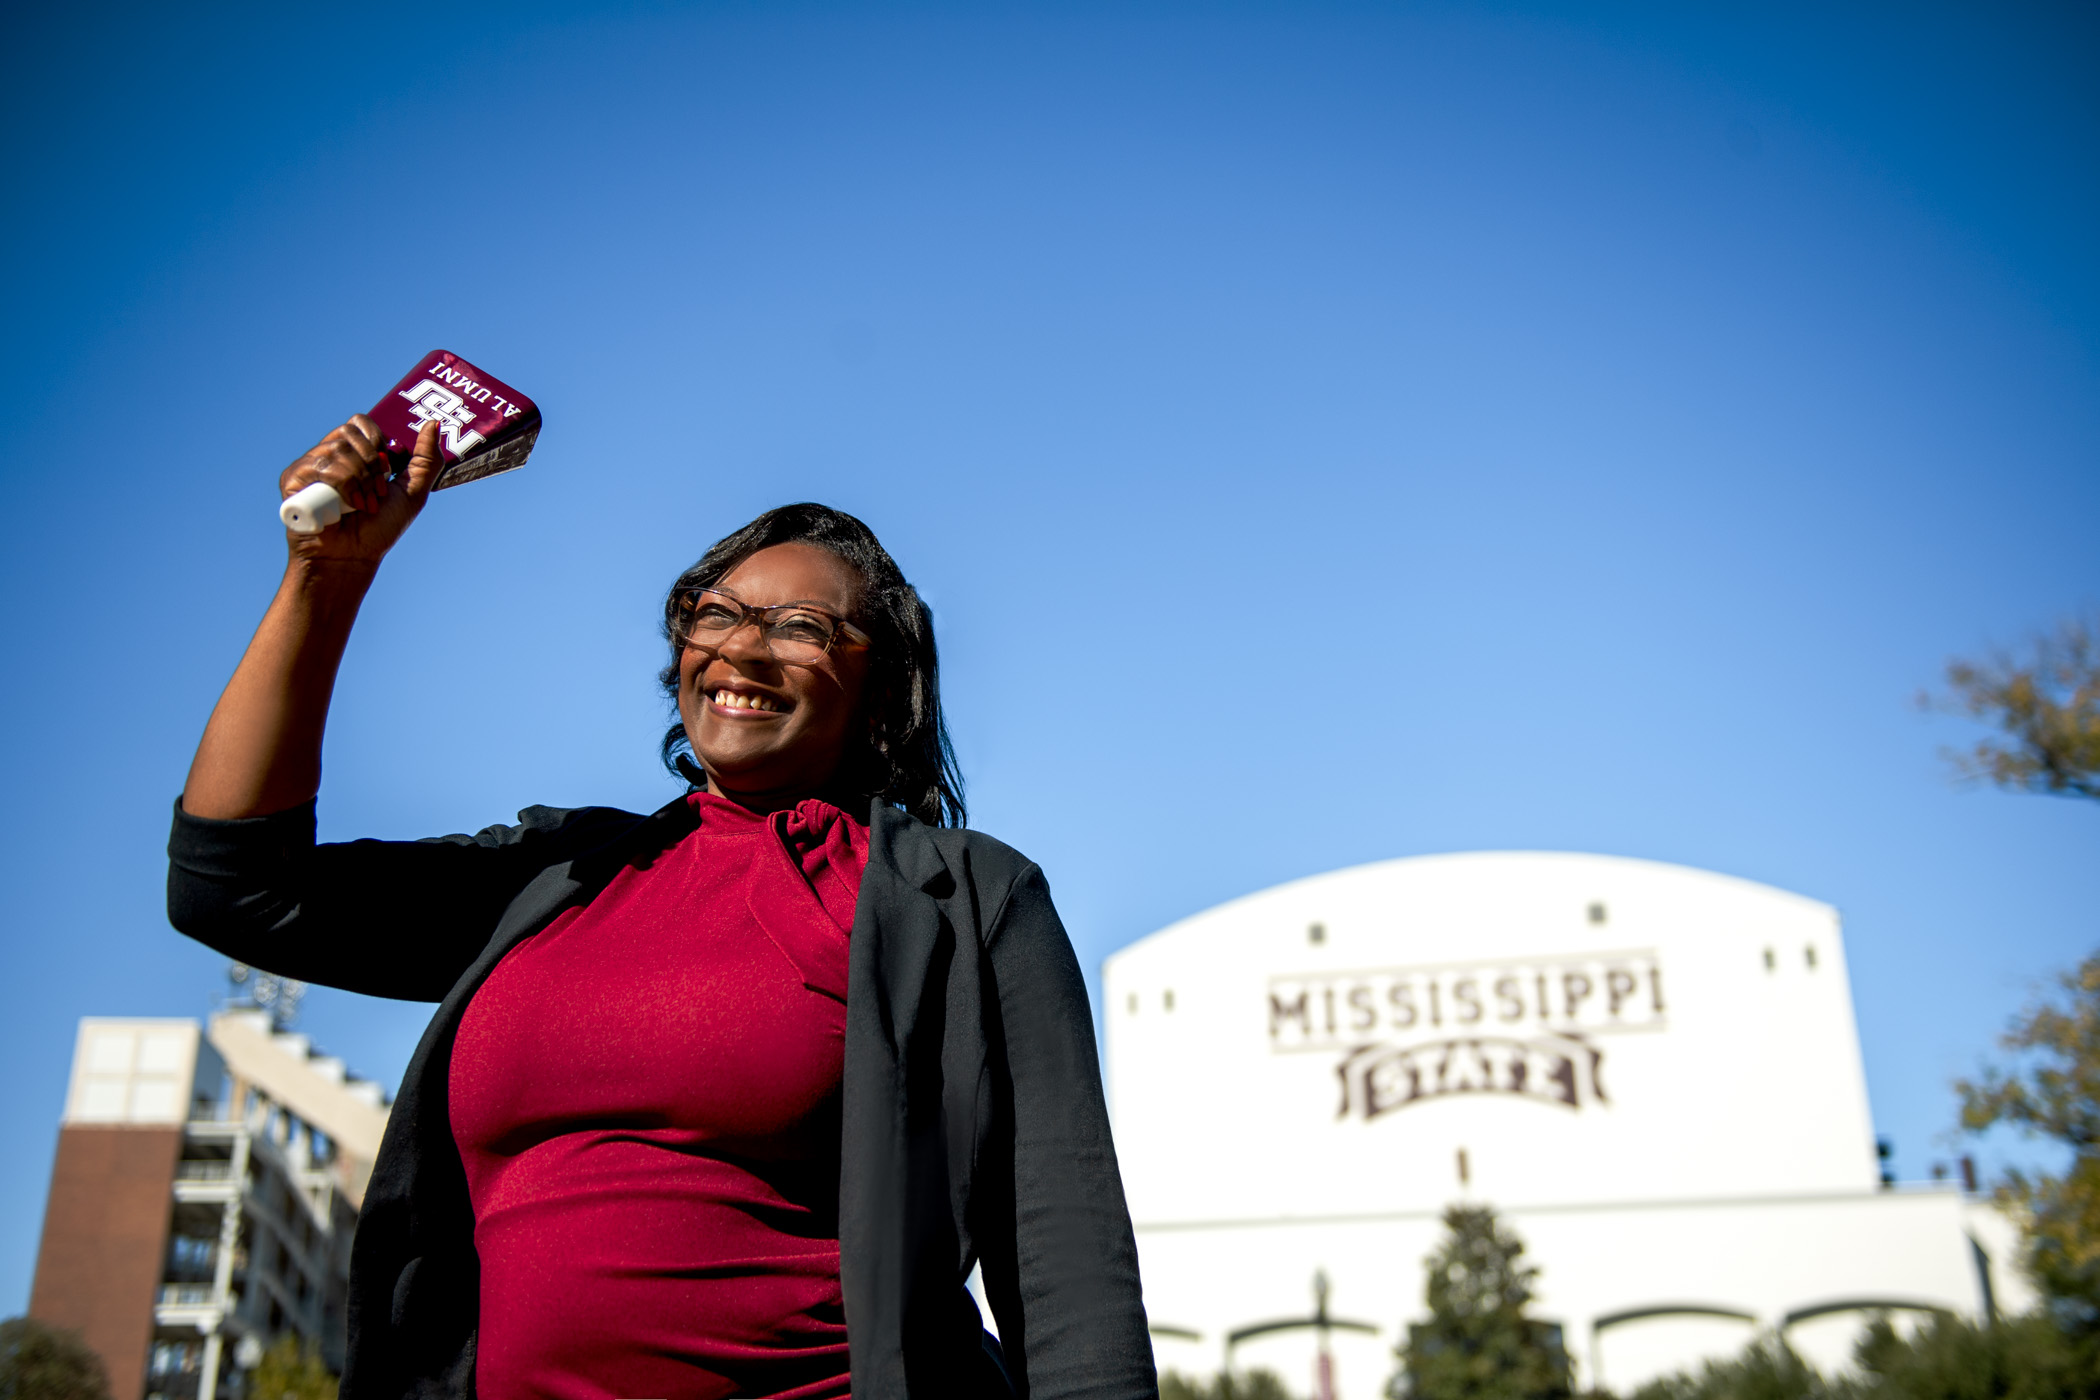 Fartilia Chandler, pictured ringing an MSU cowbell on campus